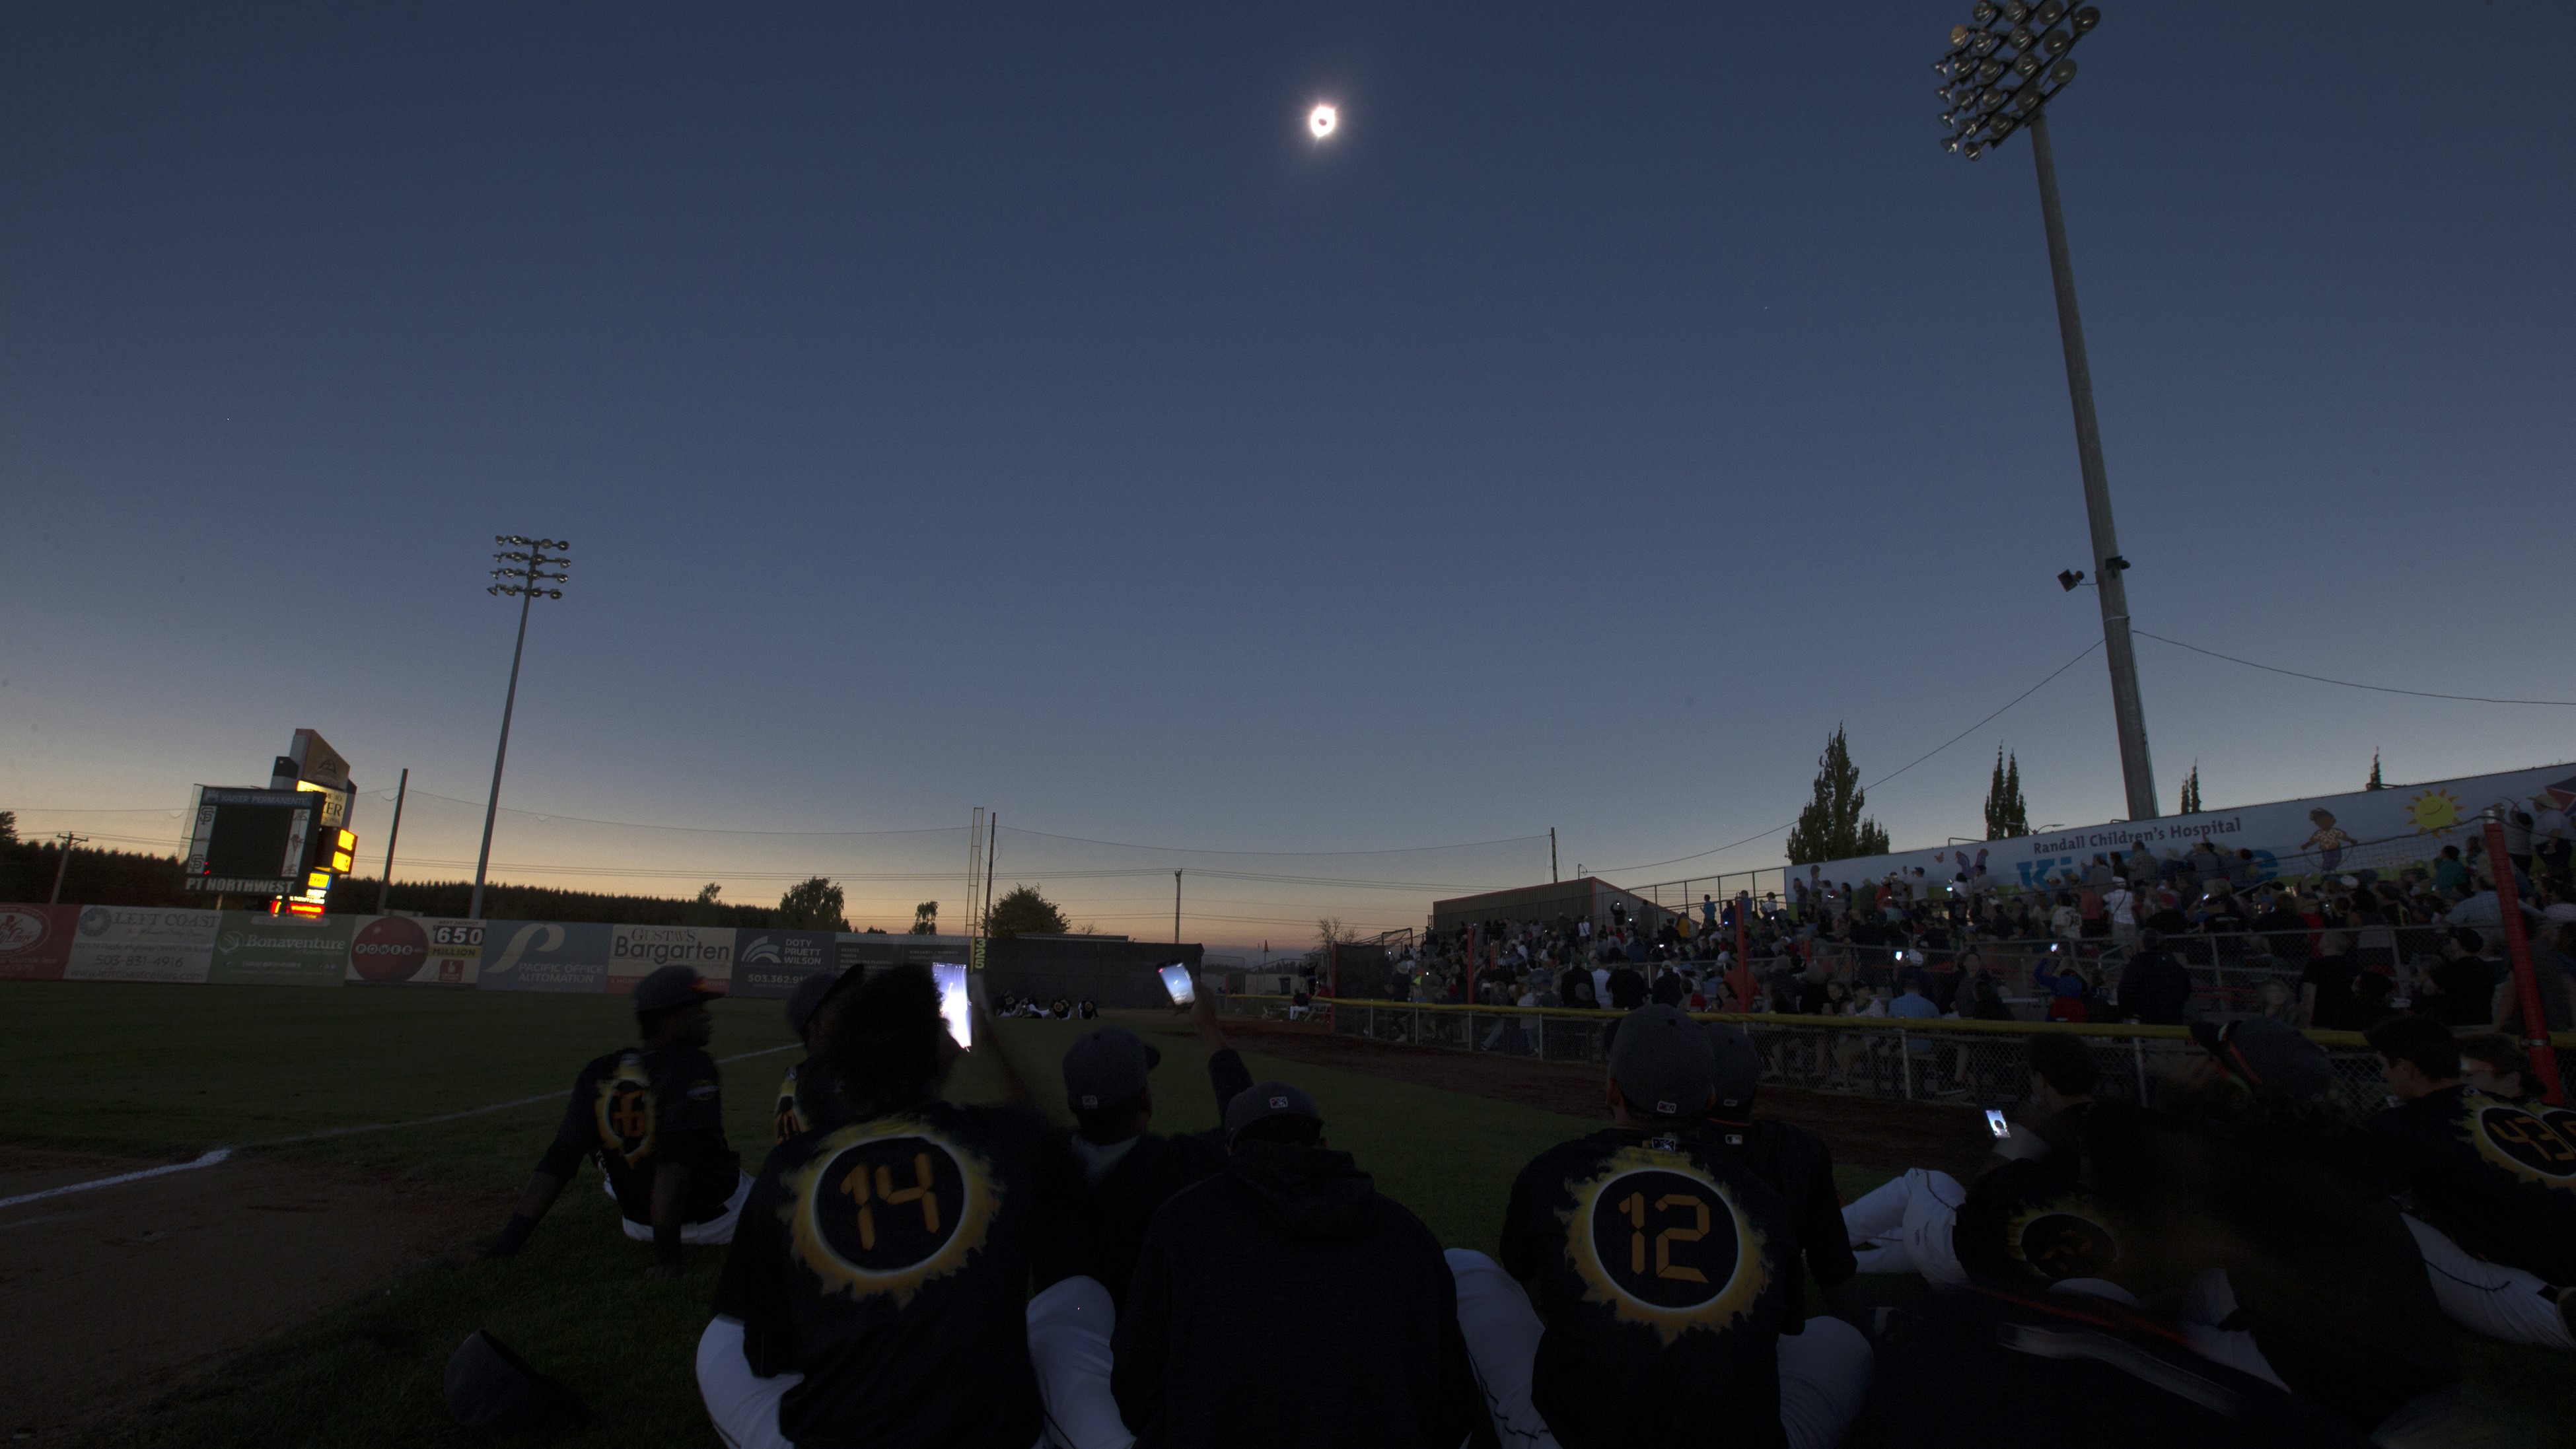 In 2017, a minor league baseball game between the Salem-Keizer Volcanoes and Hillsboro Hops was delayed due to the total solar eclipse — the first 